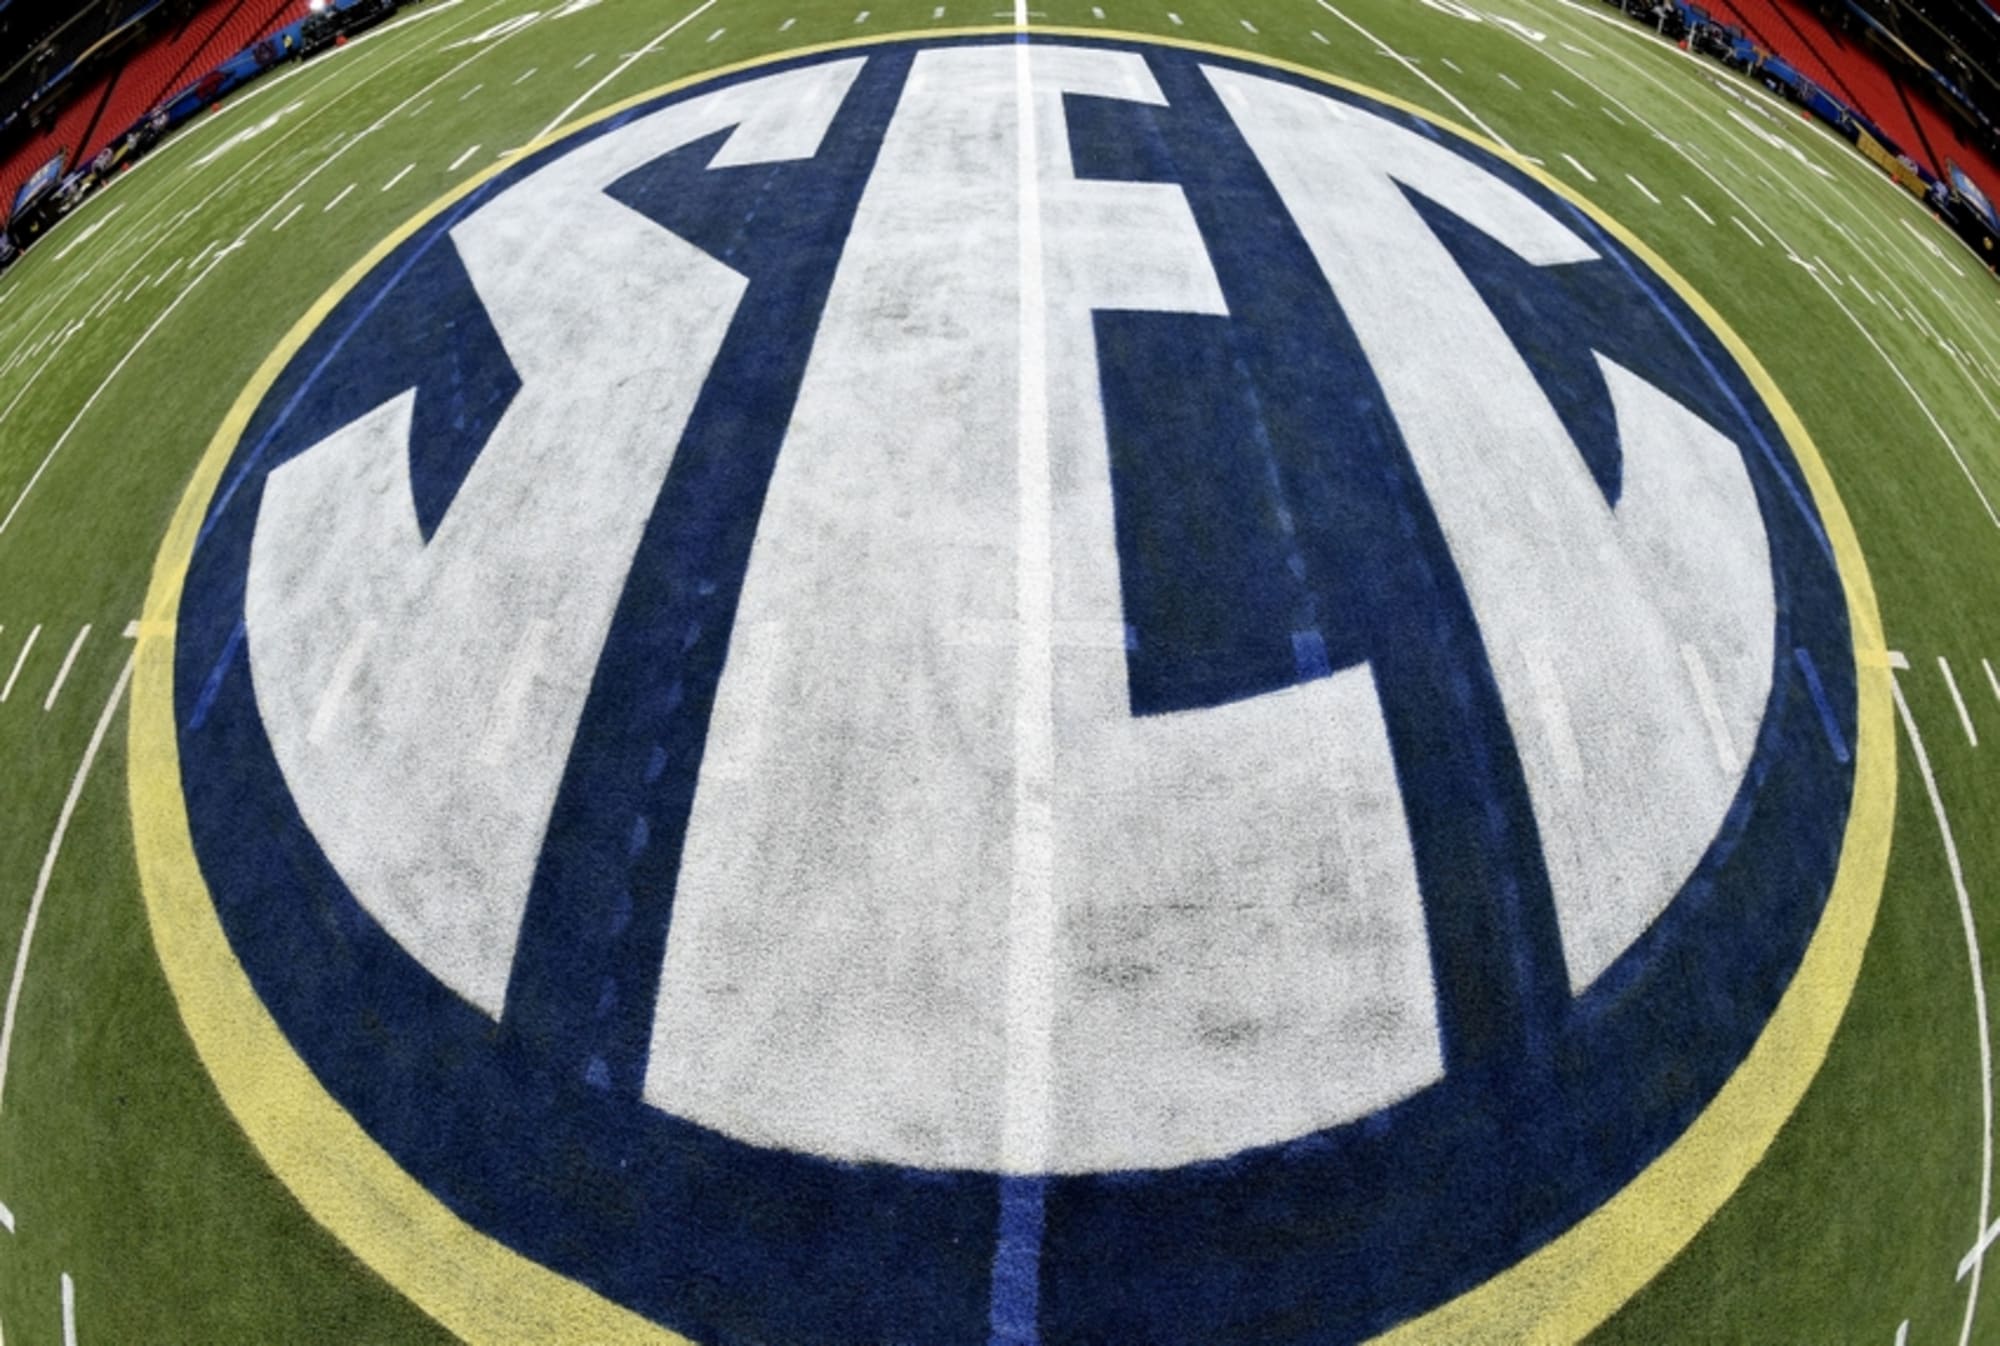 SEC Football: One Big Dysfunctional Family